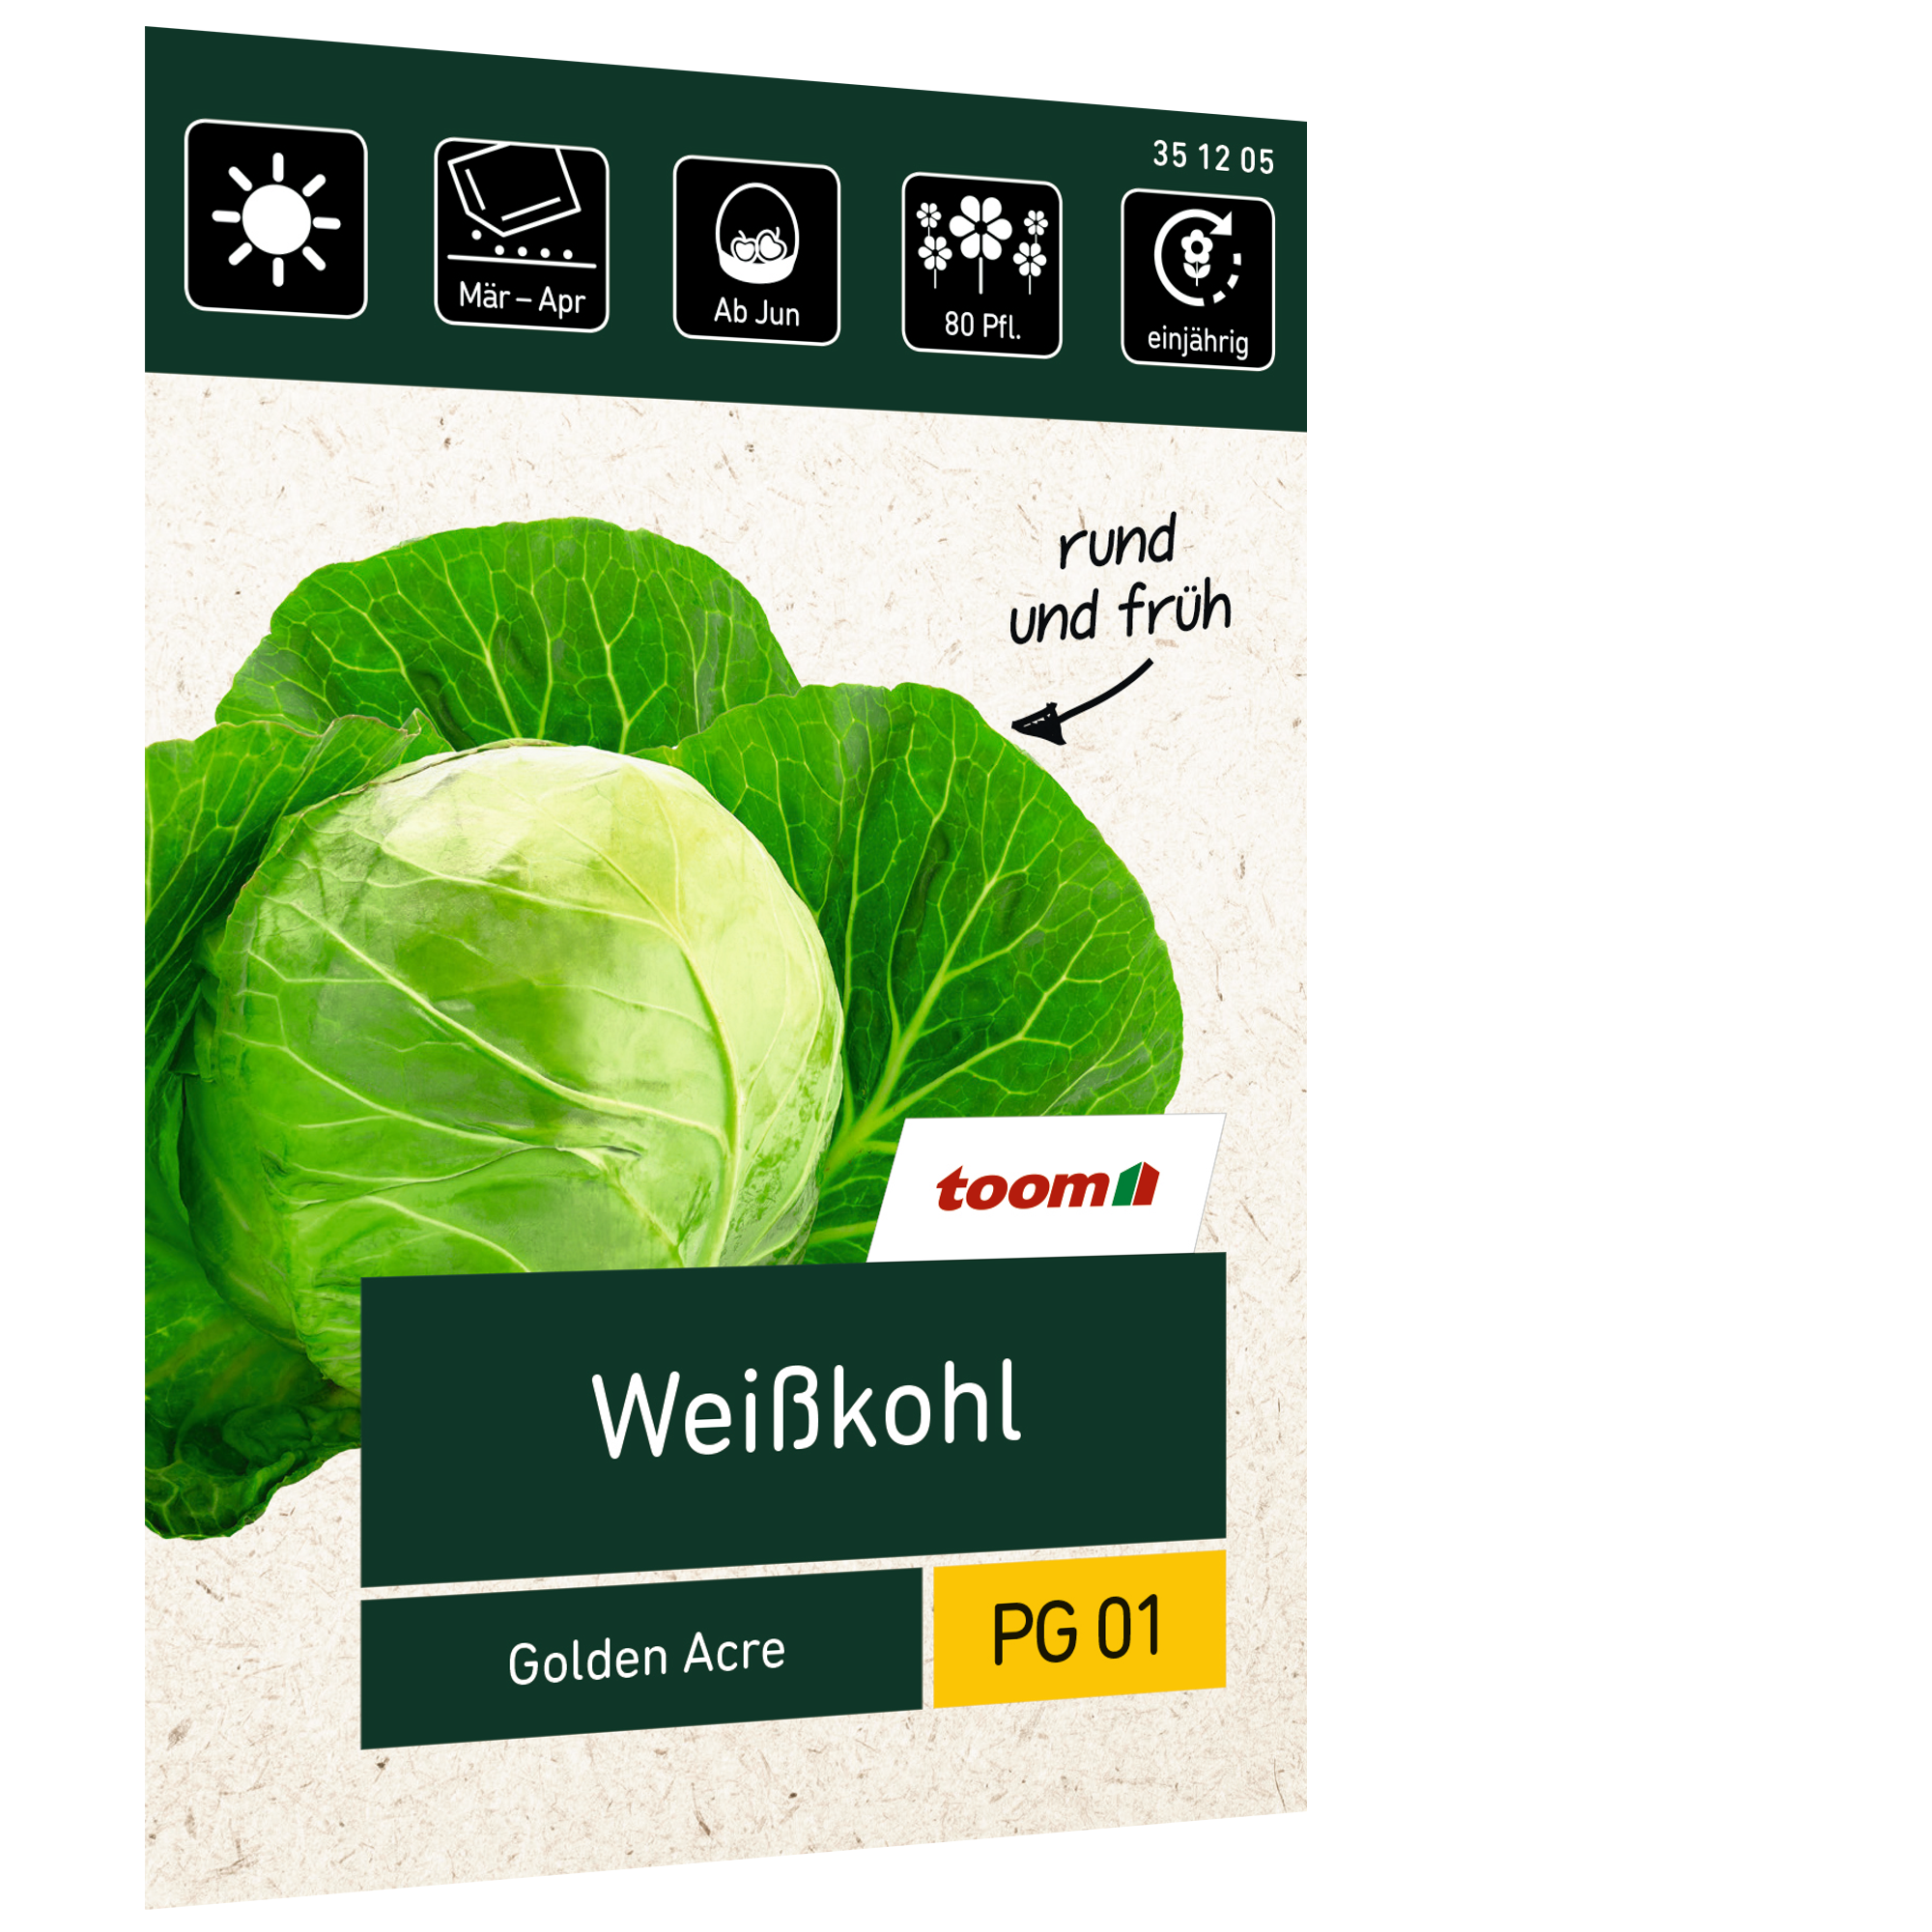 Weißkohl 'Golden Acre' + product picture